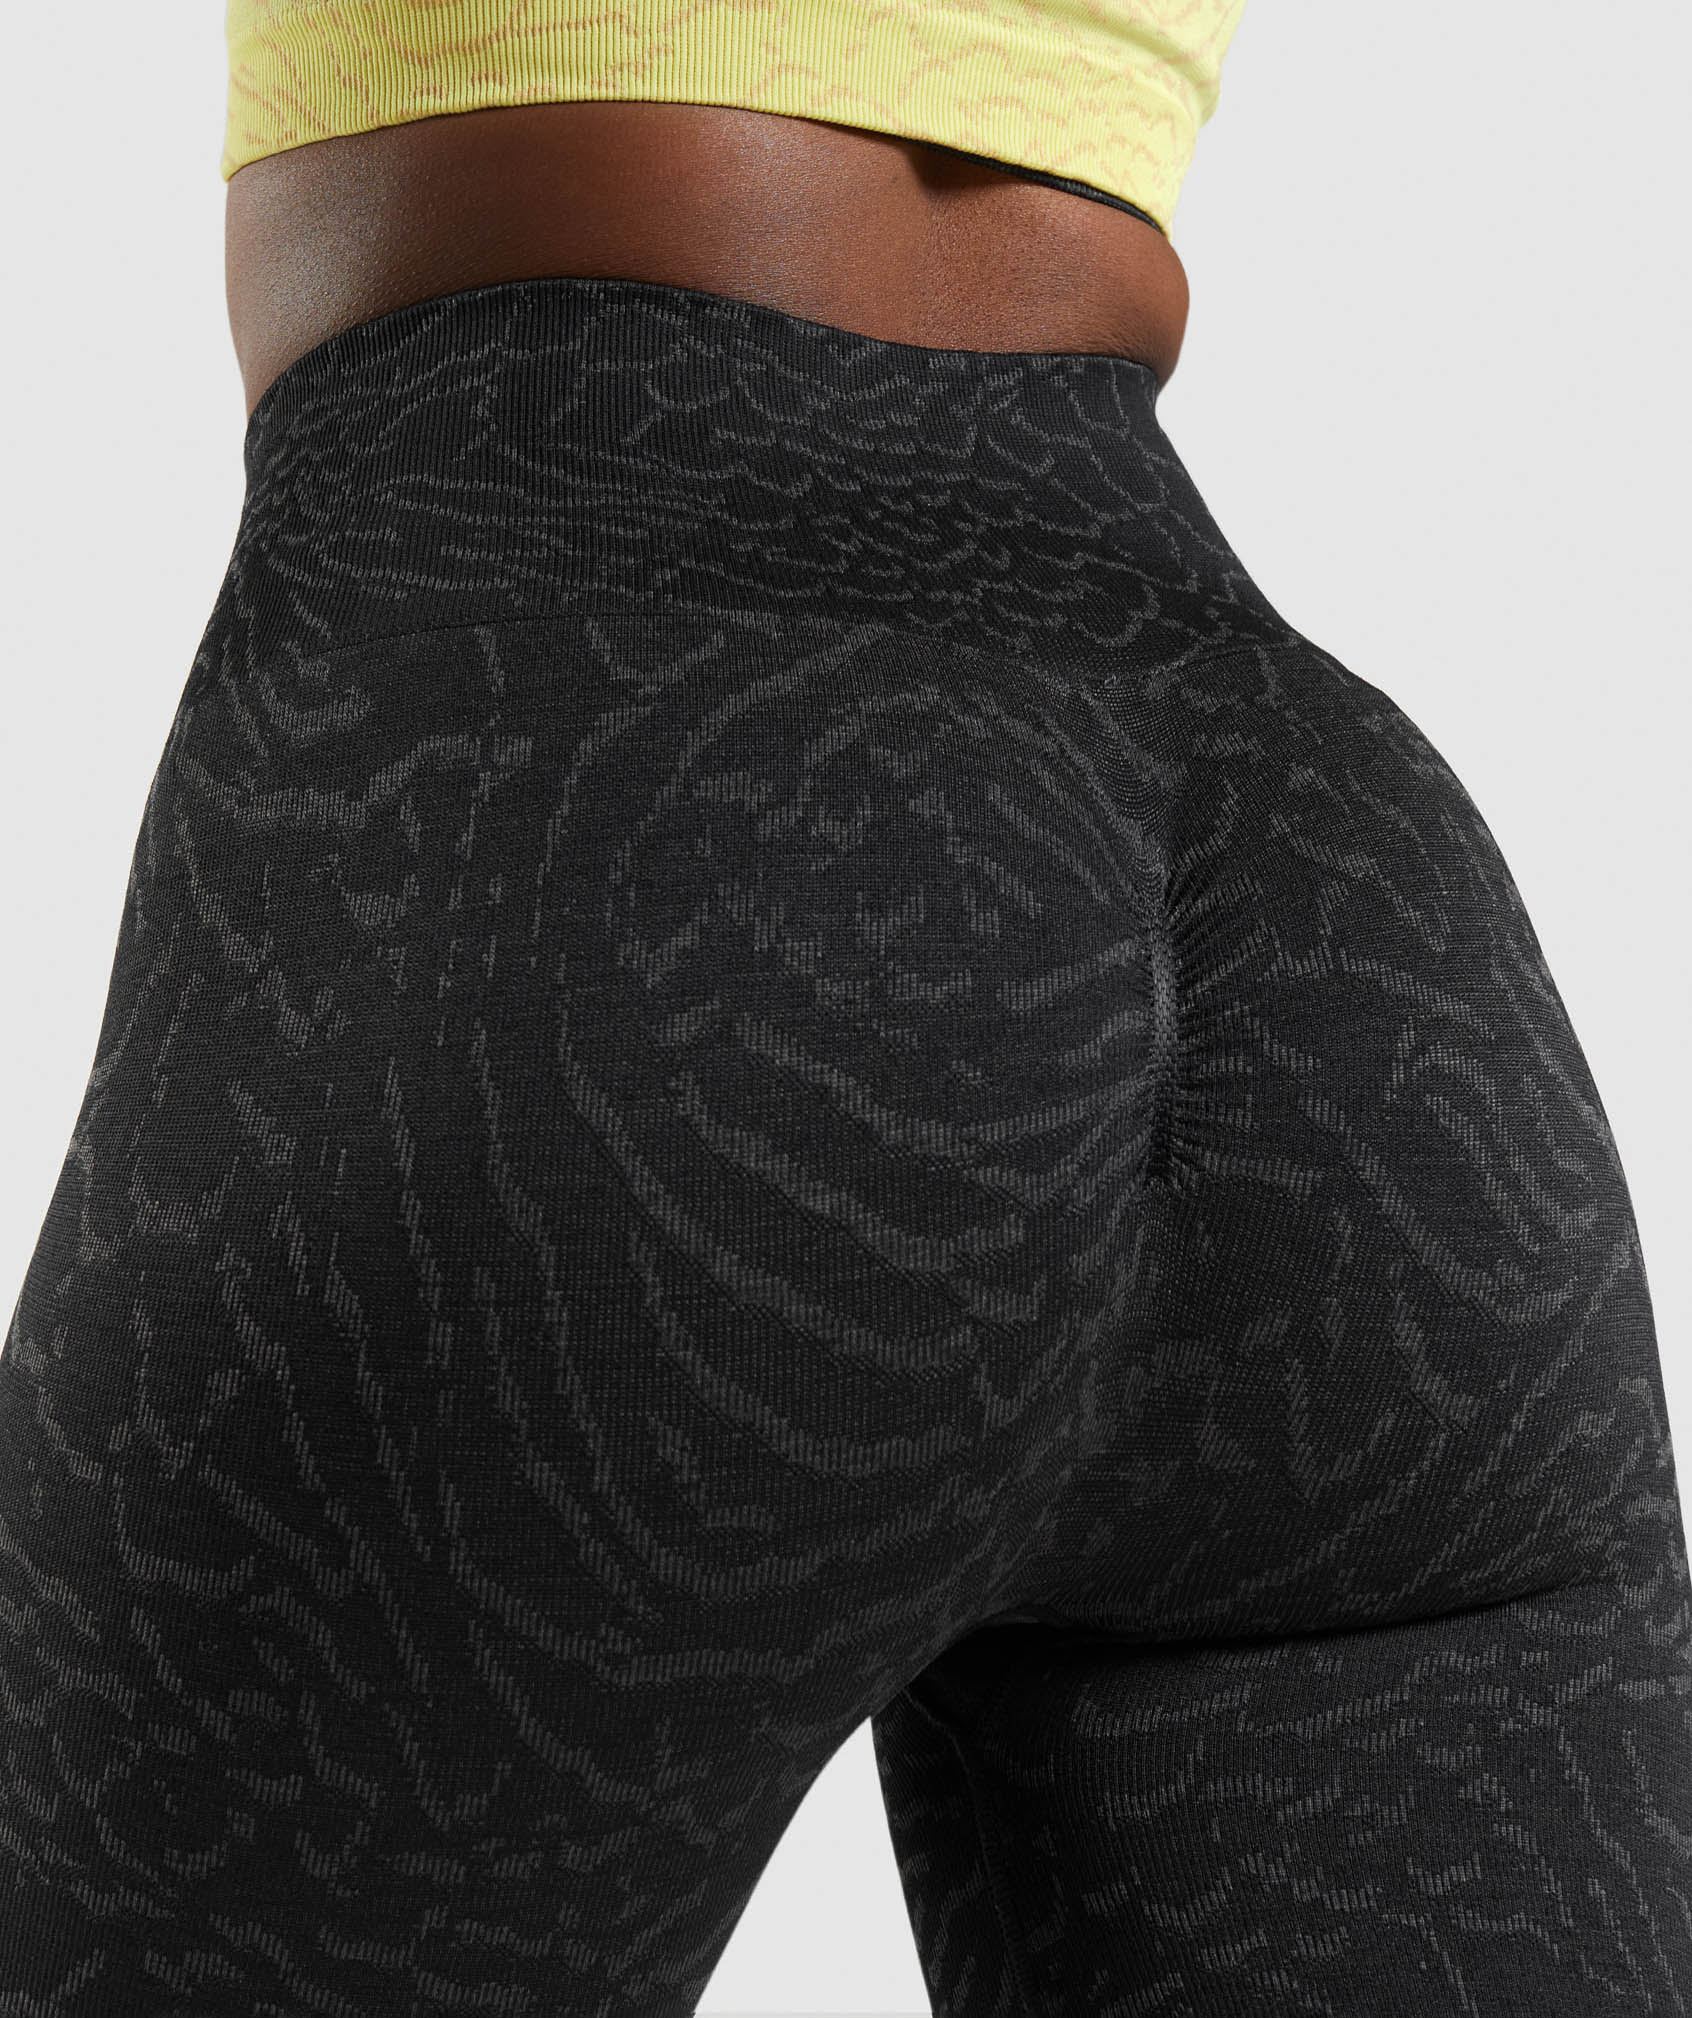 Adapt Animal Seamless Cycling Shorts in Hybrid | Black - view 6